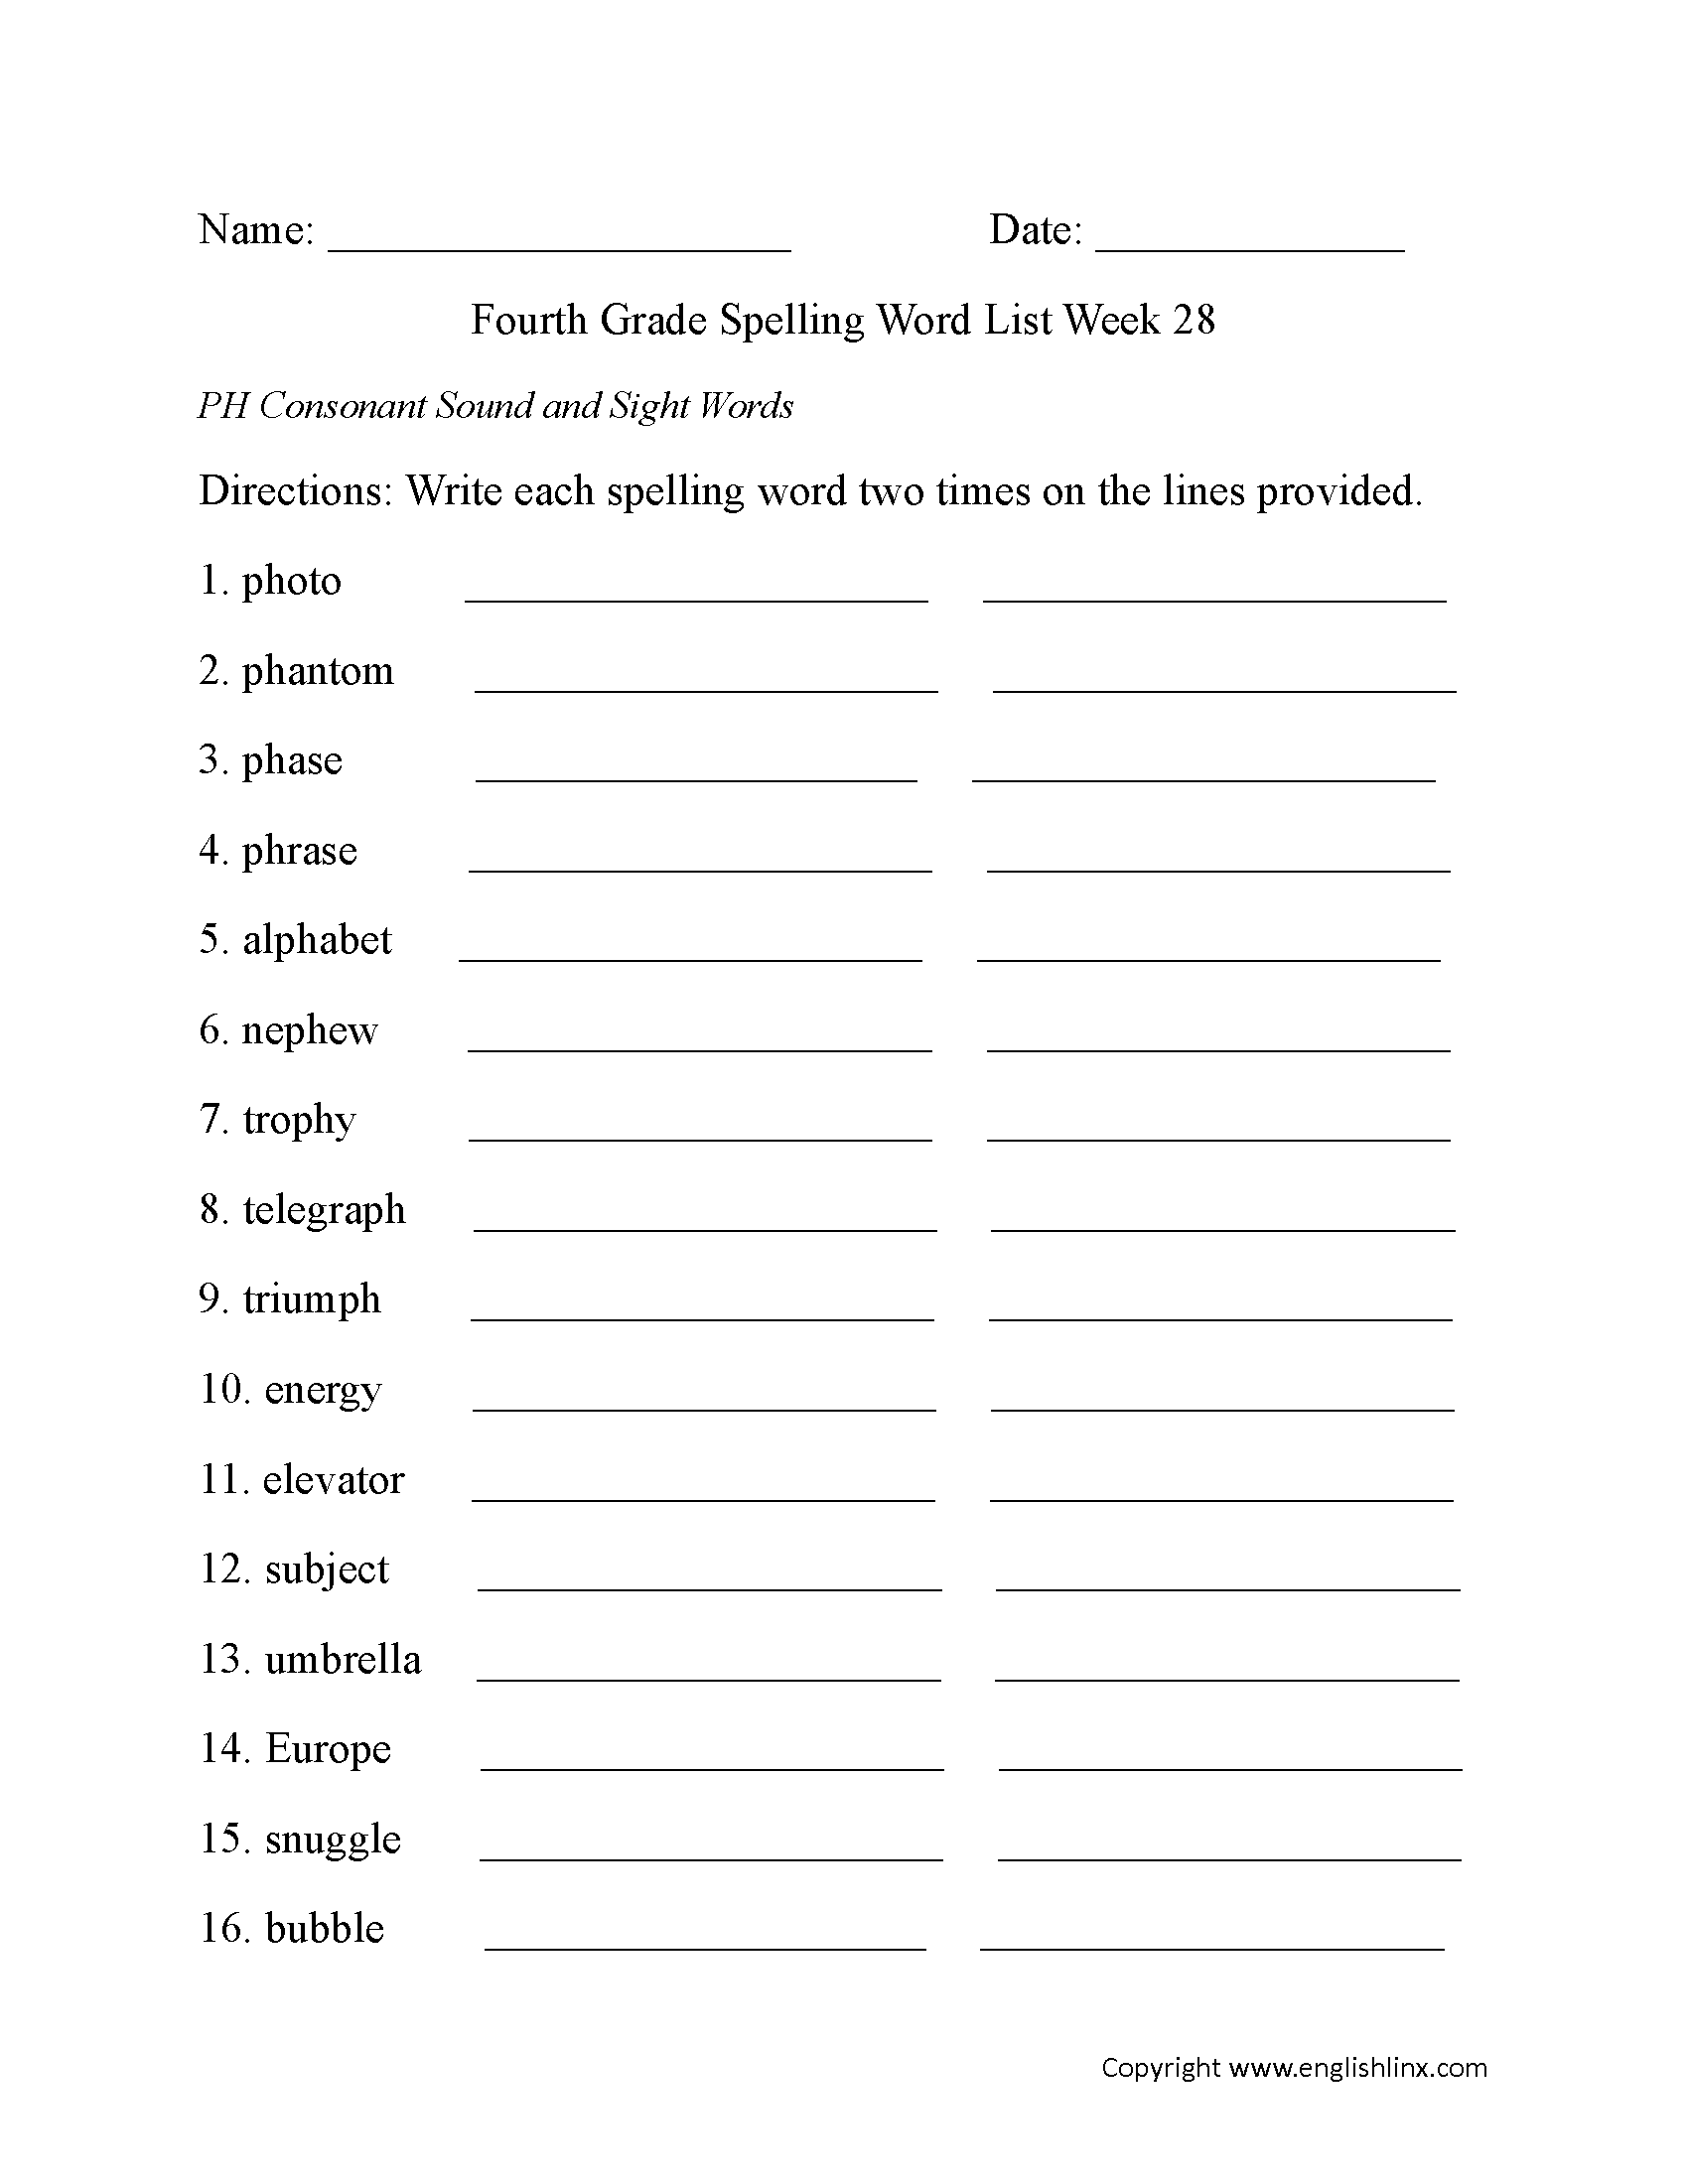 Week 28 PH Consonant and Sight Words Fourth Grade Spelling Words Worksheets